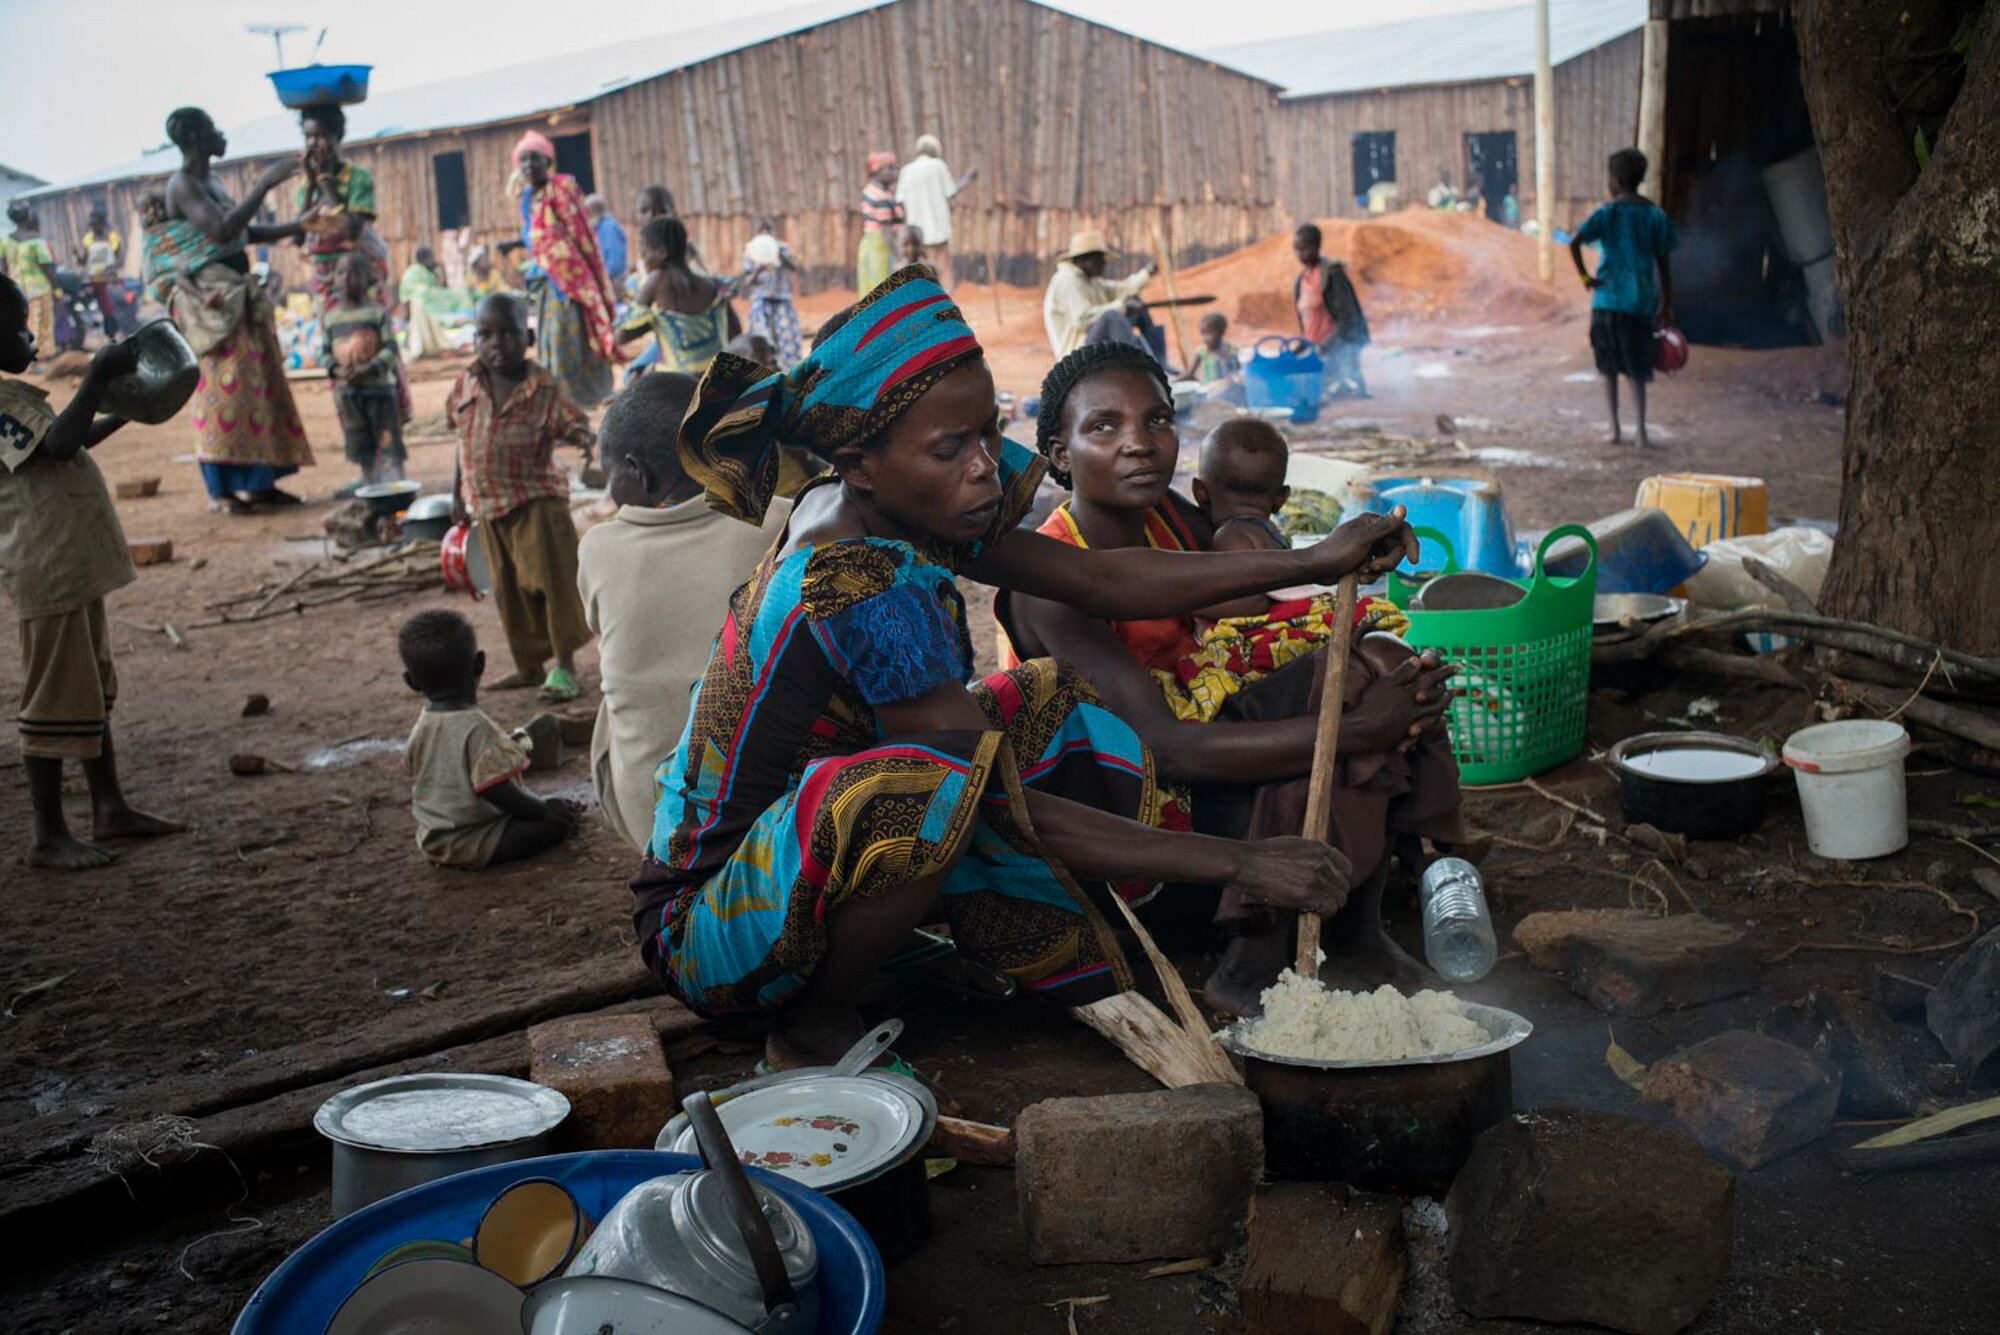  Congolese refugees wait at the reception center in Kyangwali, Uganda, where refugees spend several days before being transferred to a settlement (aka camp). Since December, approximately 50,000 refugees have arrived on boats used to cross Lake Alber